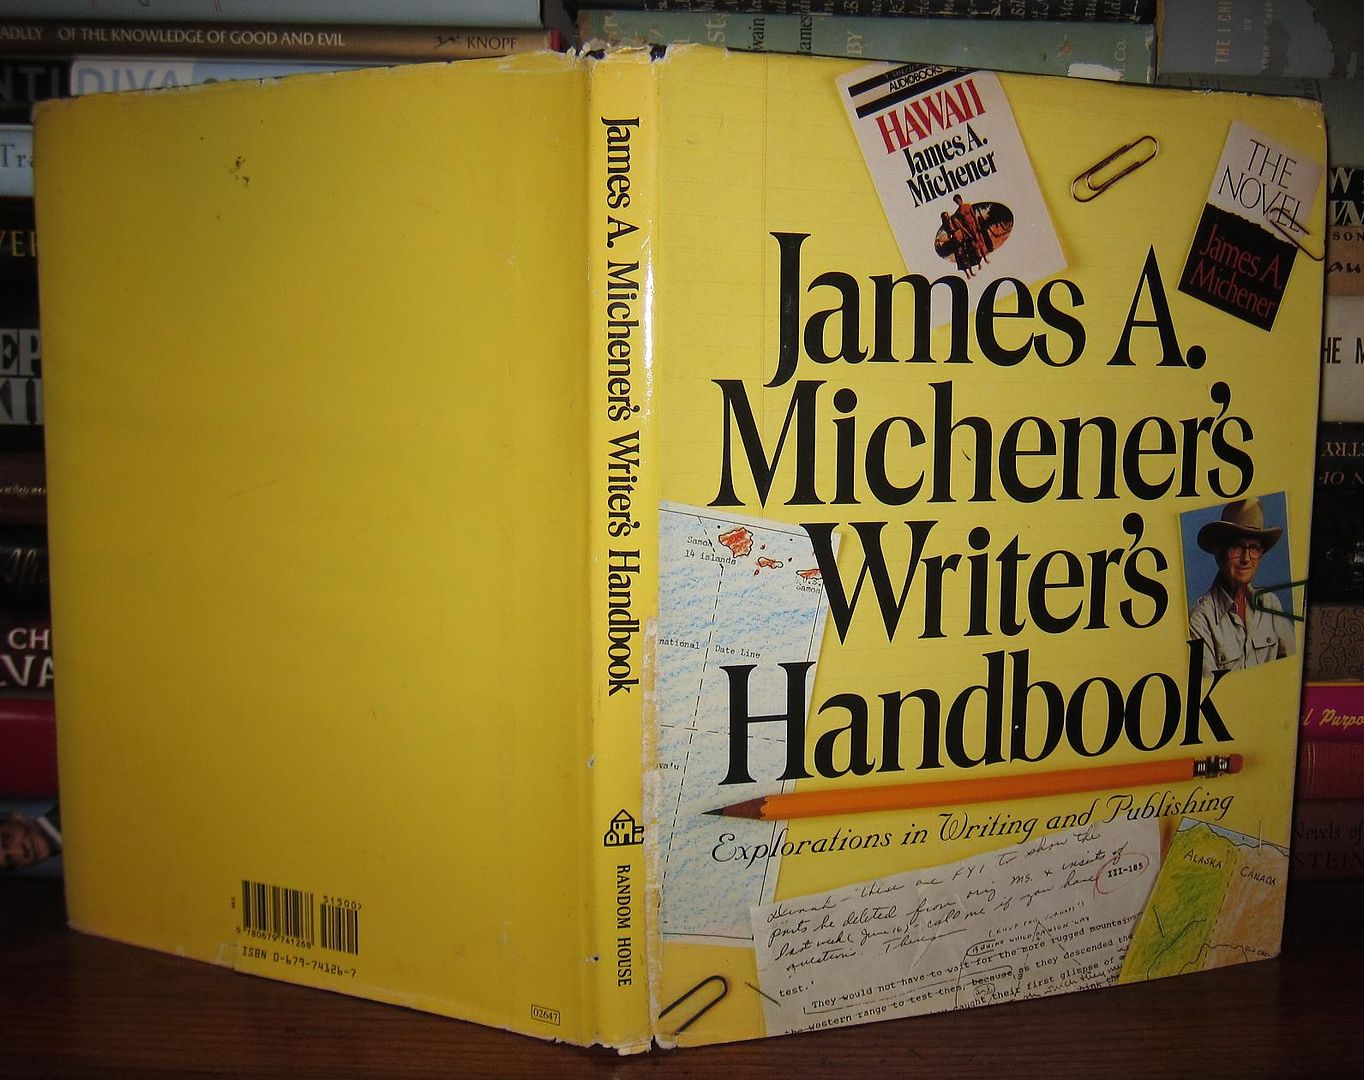 JAMES A. MICHENER - James A. Michener's Writer's Handbook Explorations in Writing and Publishing